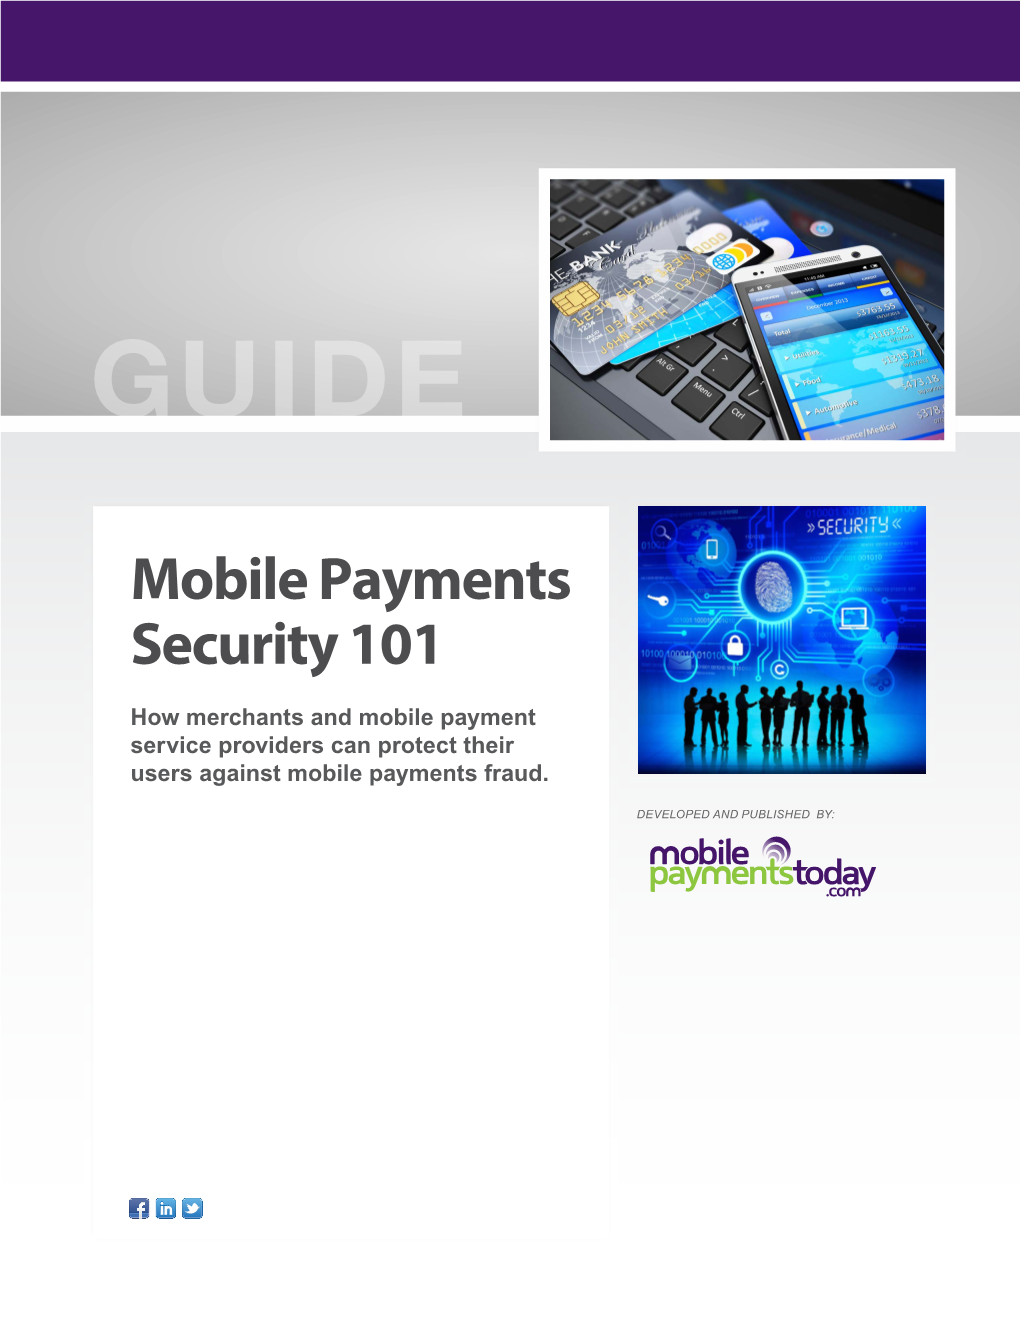 Mobile Payments Security 101